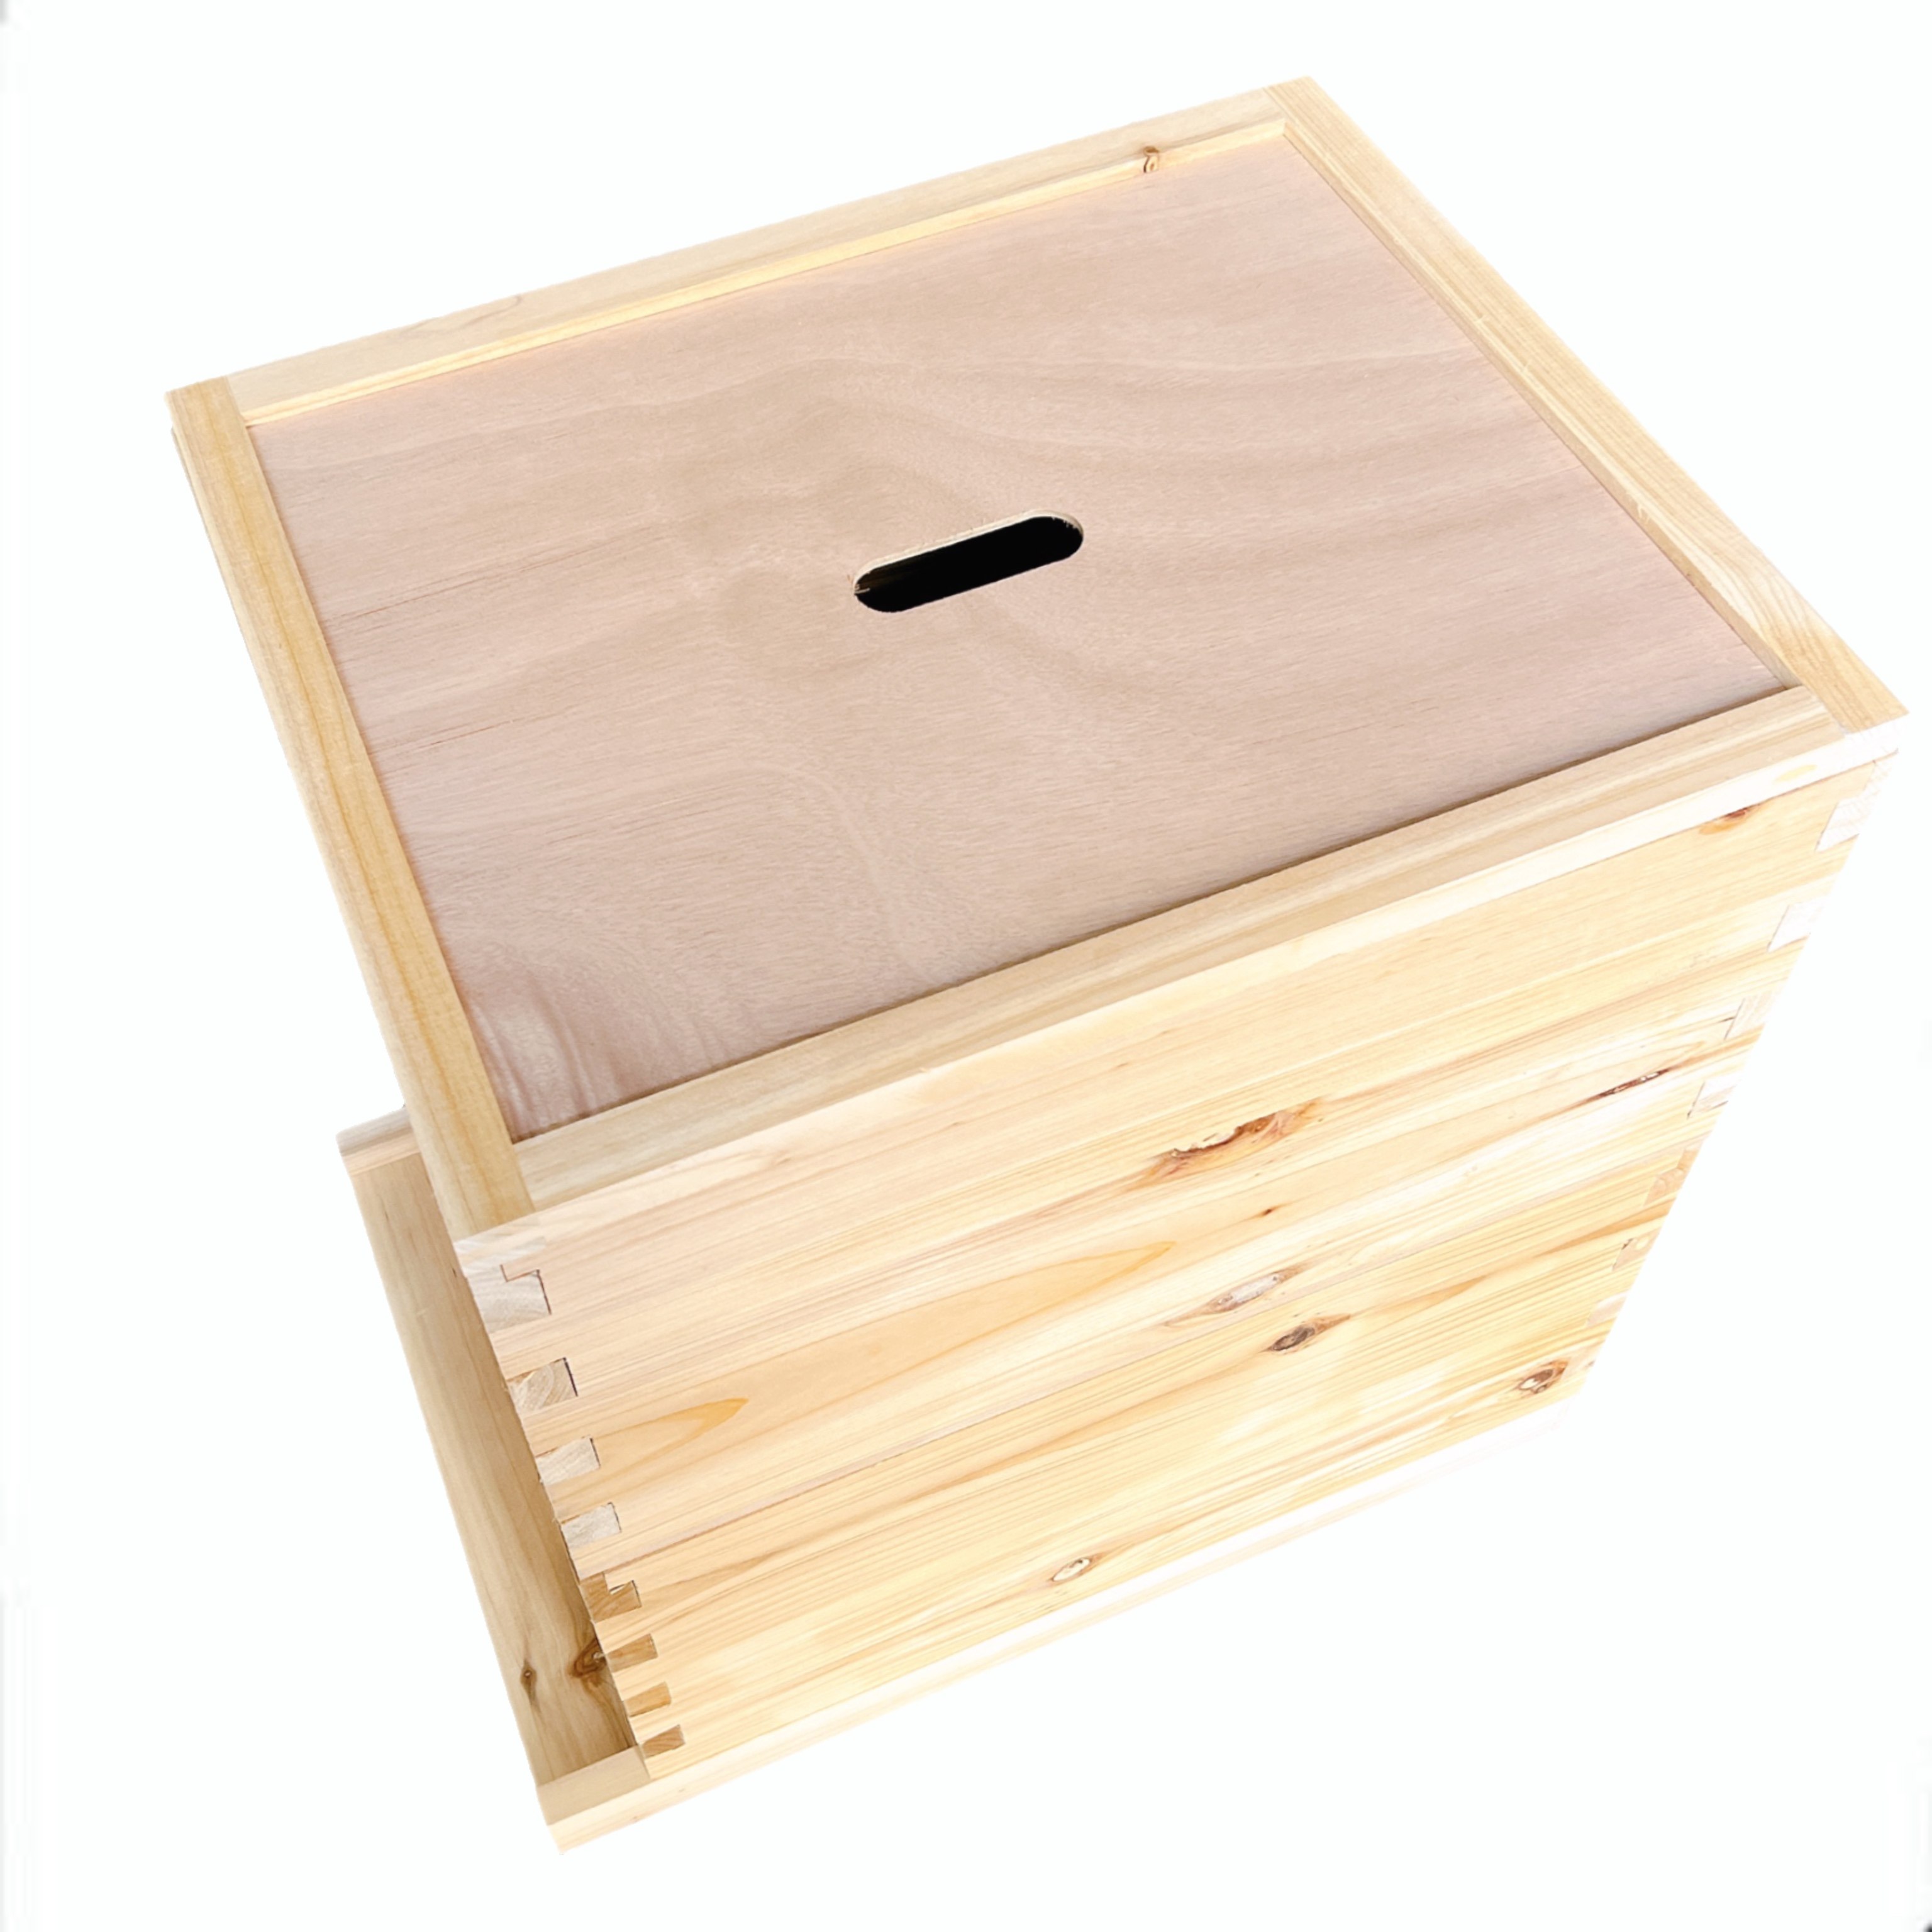 Bees Box Langstroth Wooden Kit Bee Nest Beekeeping Equipment Beekeeper Tool for Bee Hive Supply Nest Frame with Metal Roof